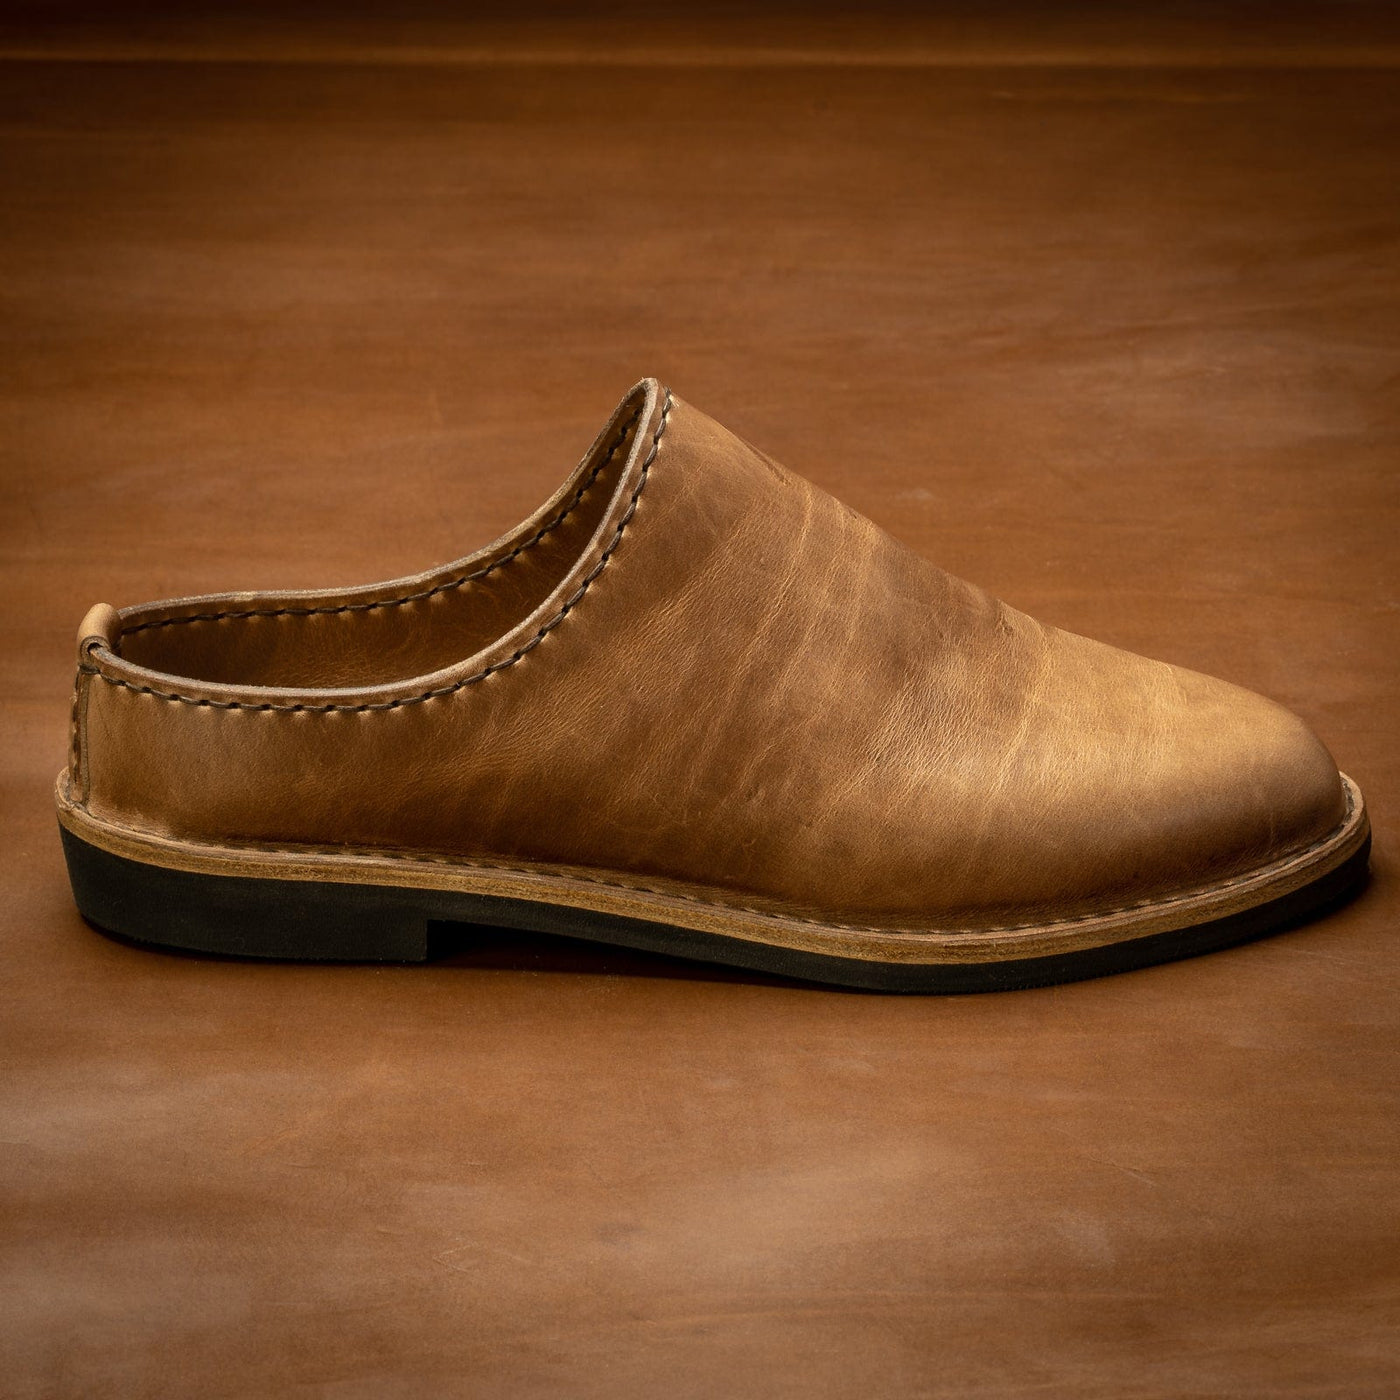 Natural Classic Slip On: Versatility and Elegance in Every Step - Popov ...